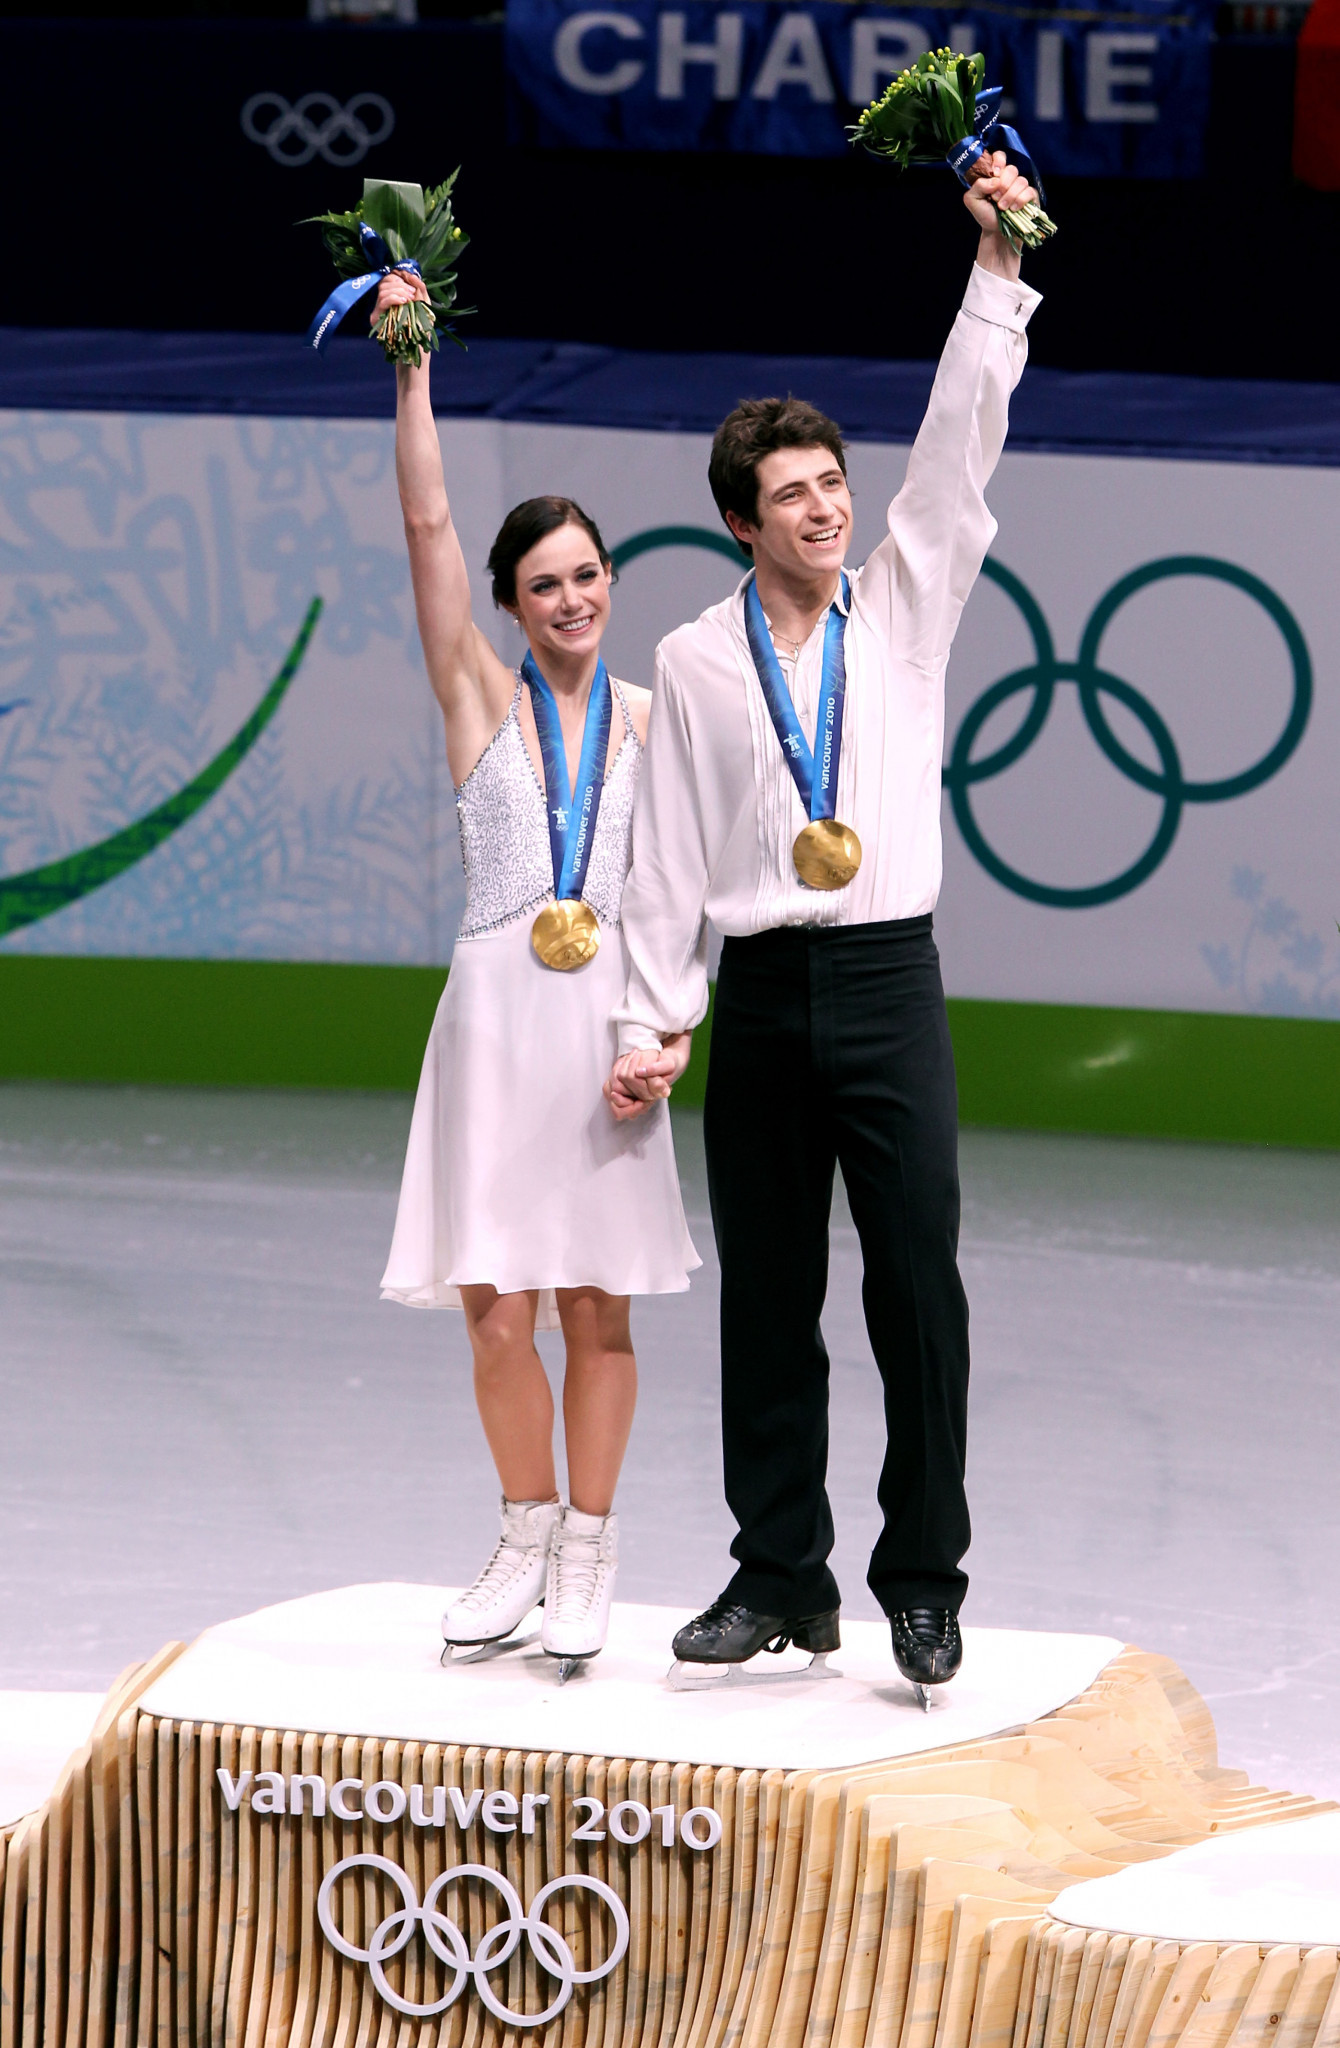 Tessa Virtue and Scott Moir won Olympic gold medals on home ice at Vancouver 2010 ©Getty Images